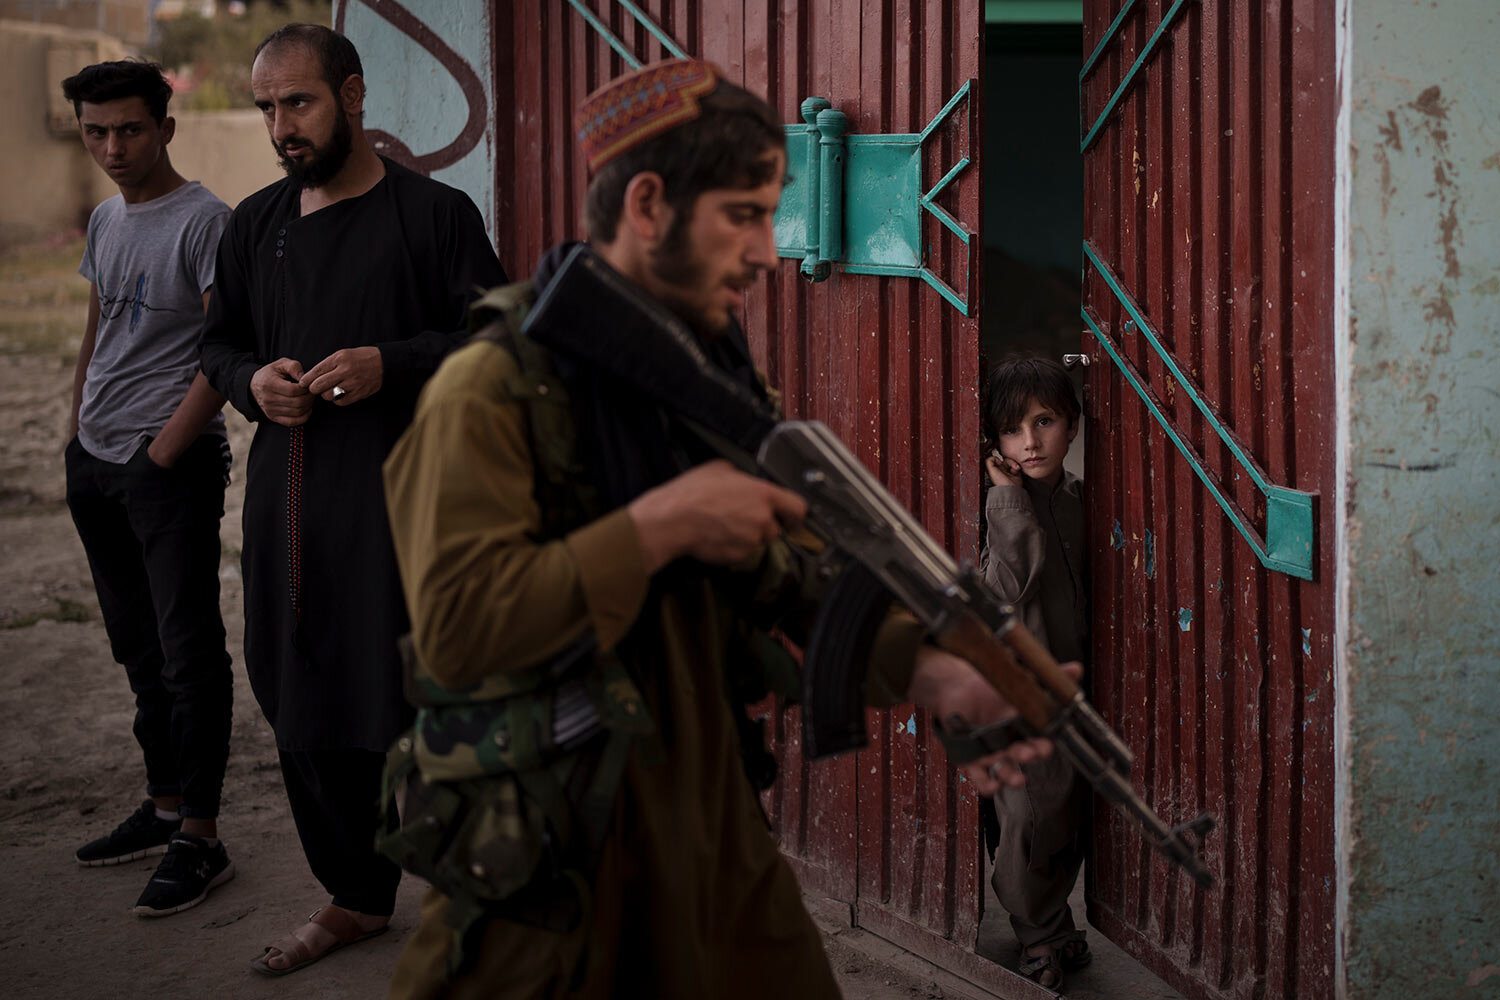  An afghan boy looks as Taliban fighters search for a man accused of stabbing in Kabul, Afghanistan, Sunday, Sept. 12, 2021. (AP Photo/Felipe Dana)  